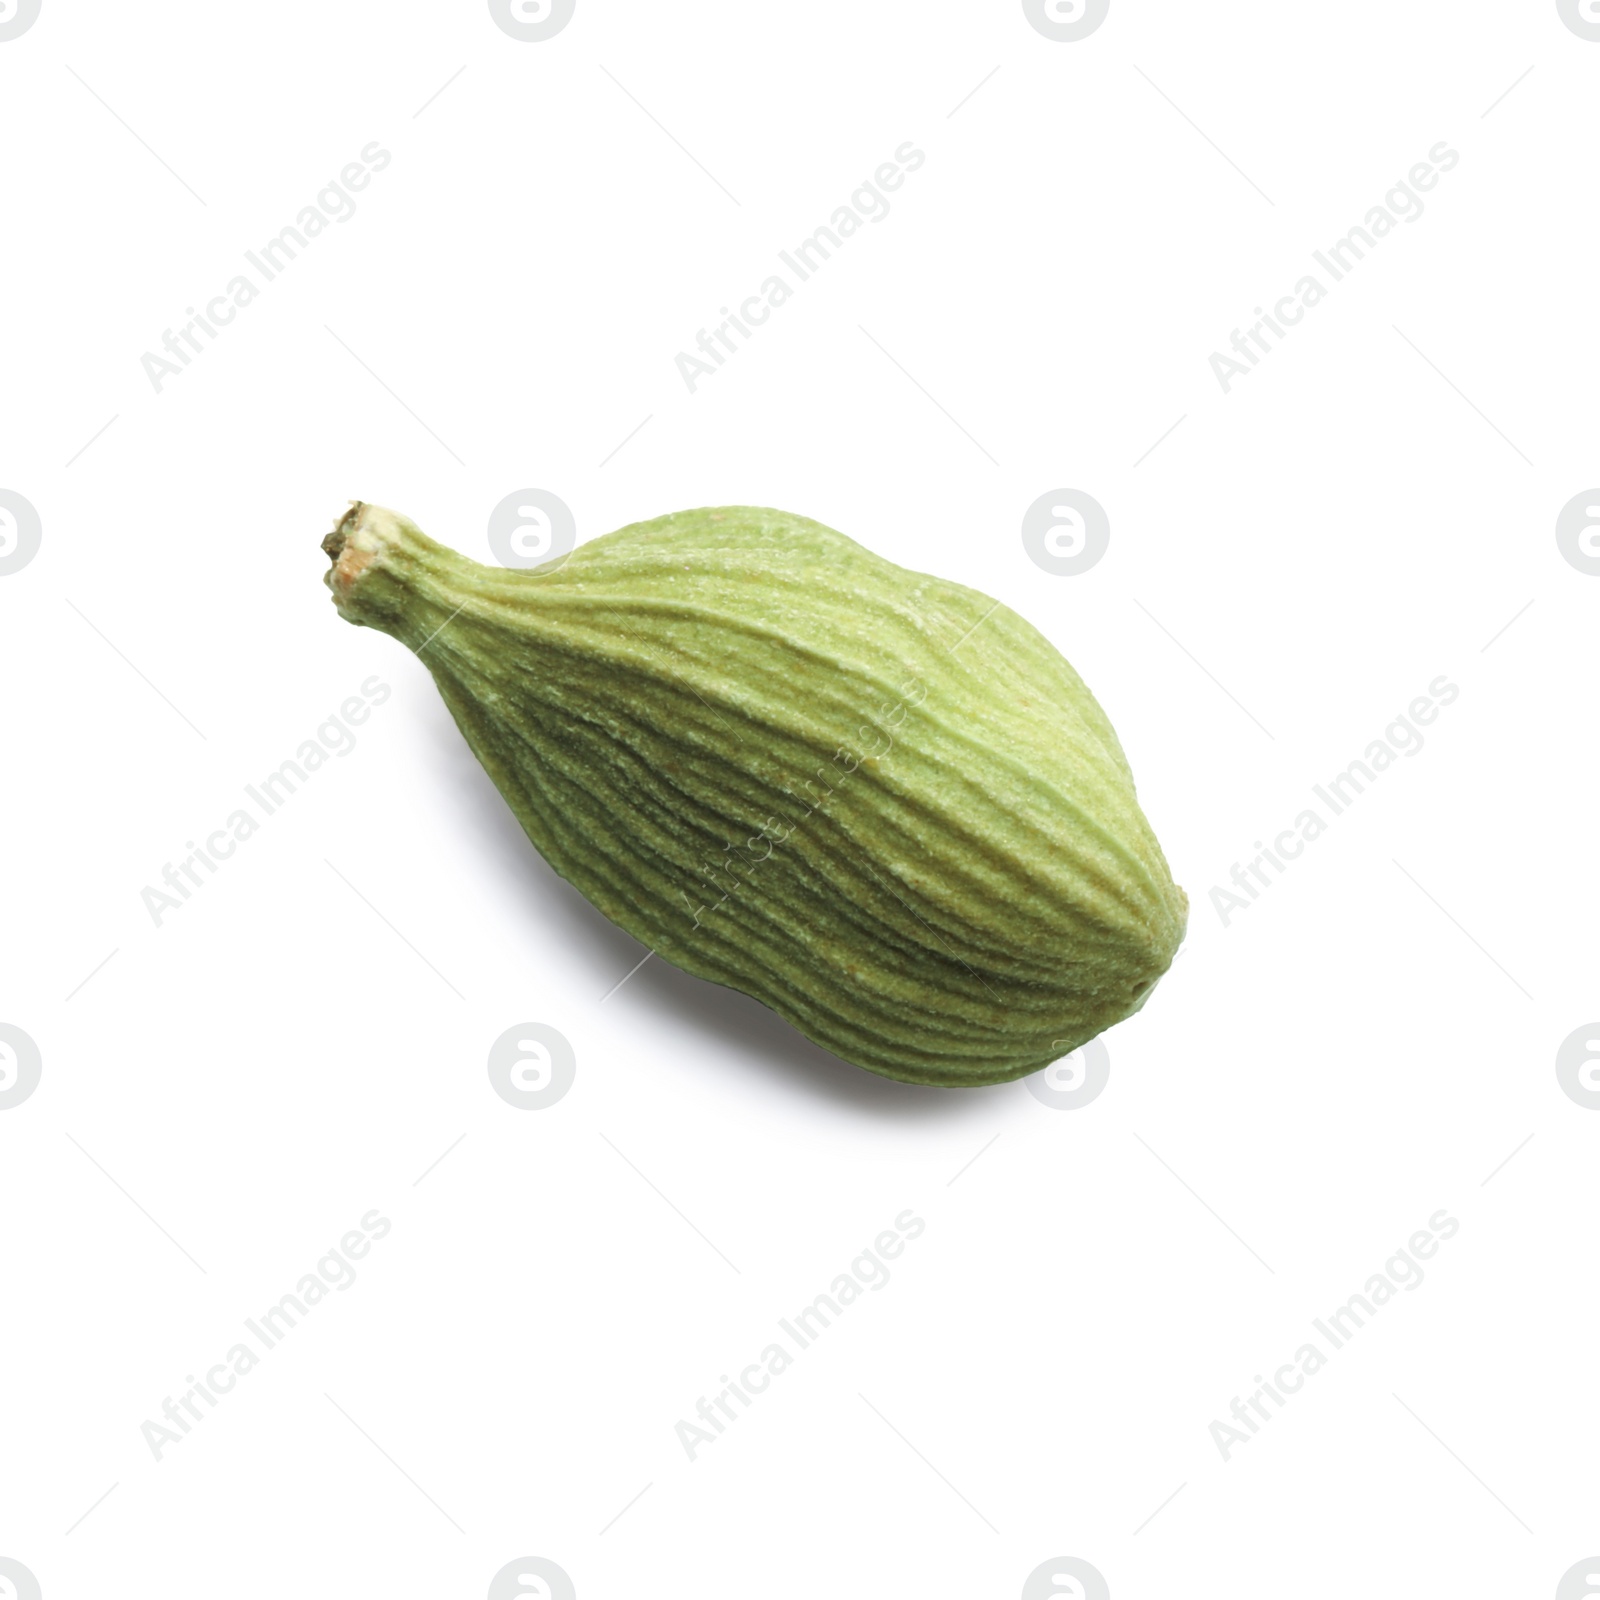 Photo of Dry green cardamom pod isolated on white, top view